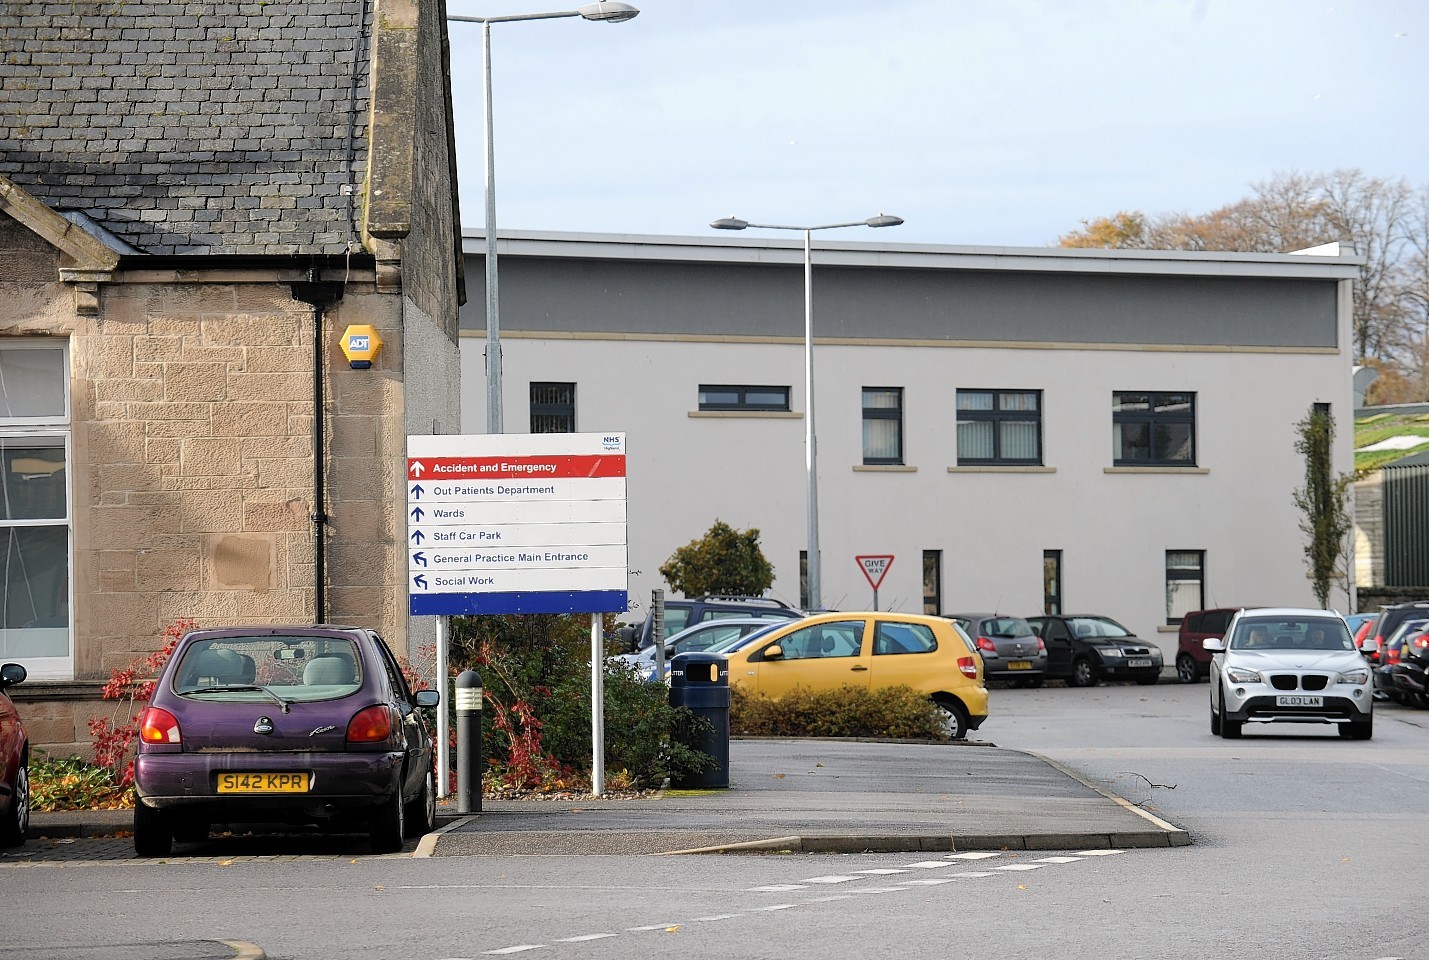 Nairn Town and County Hospital